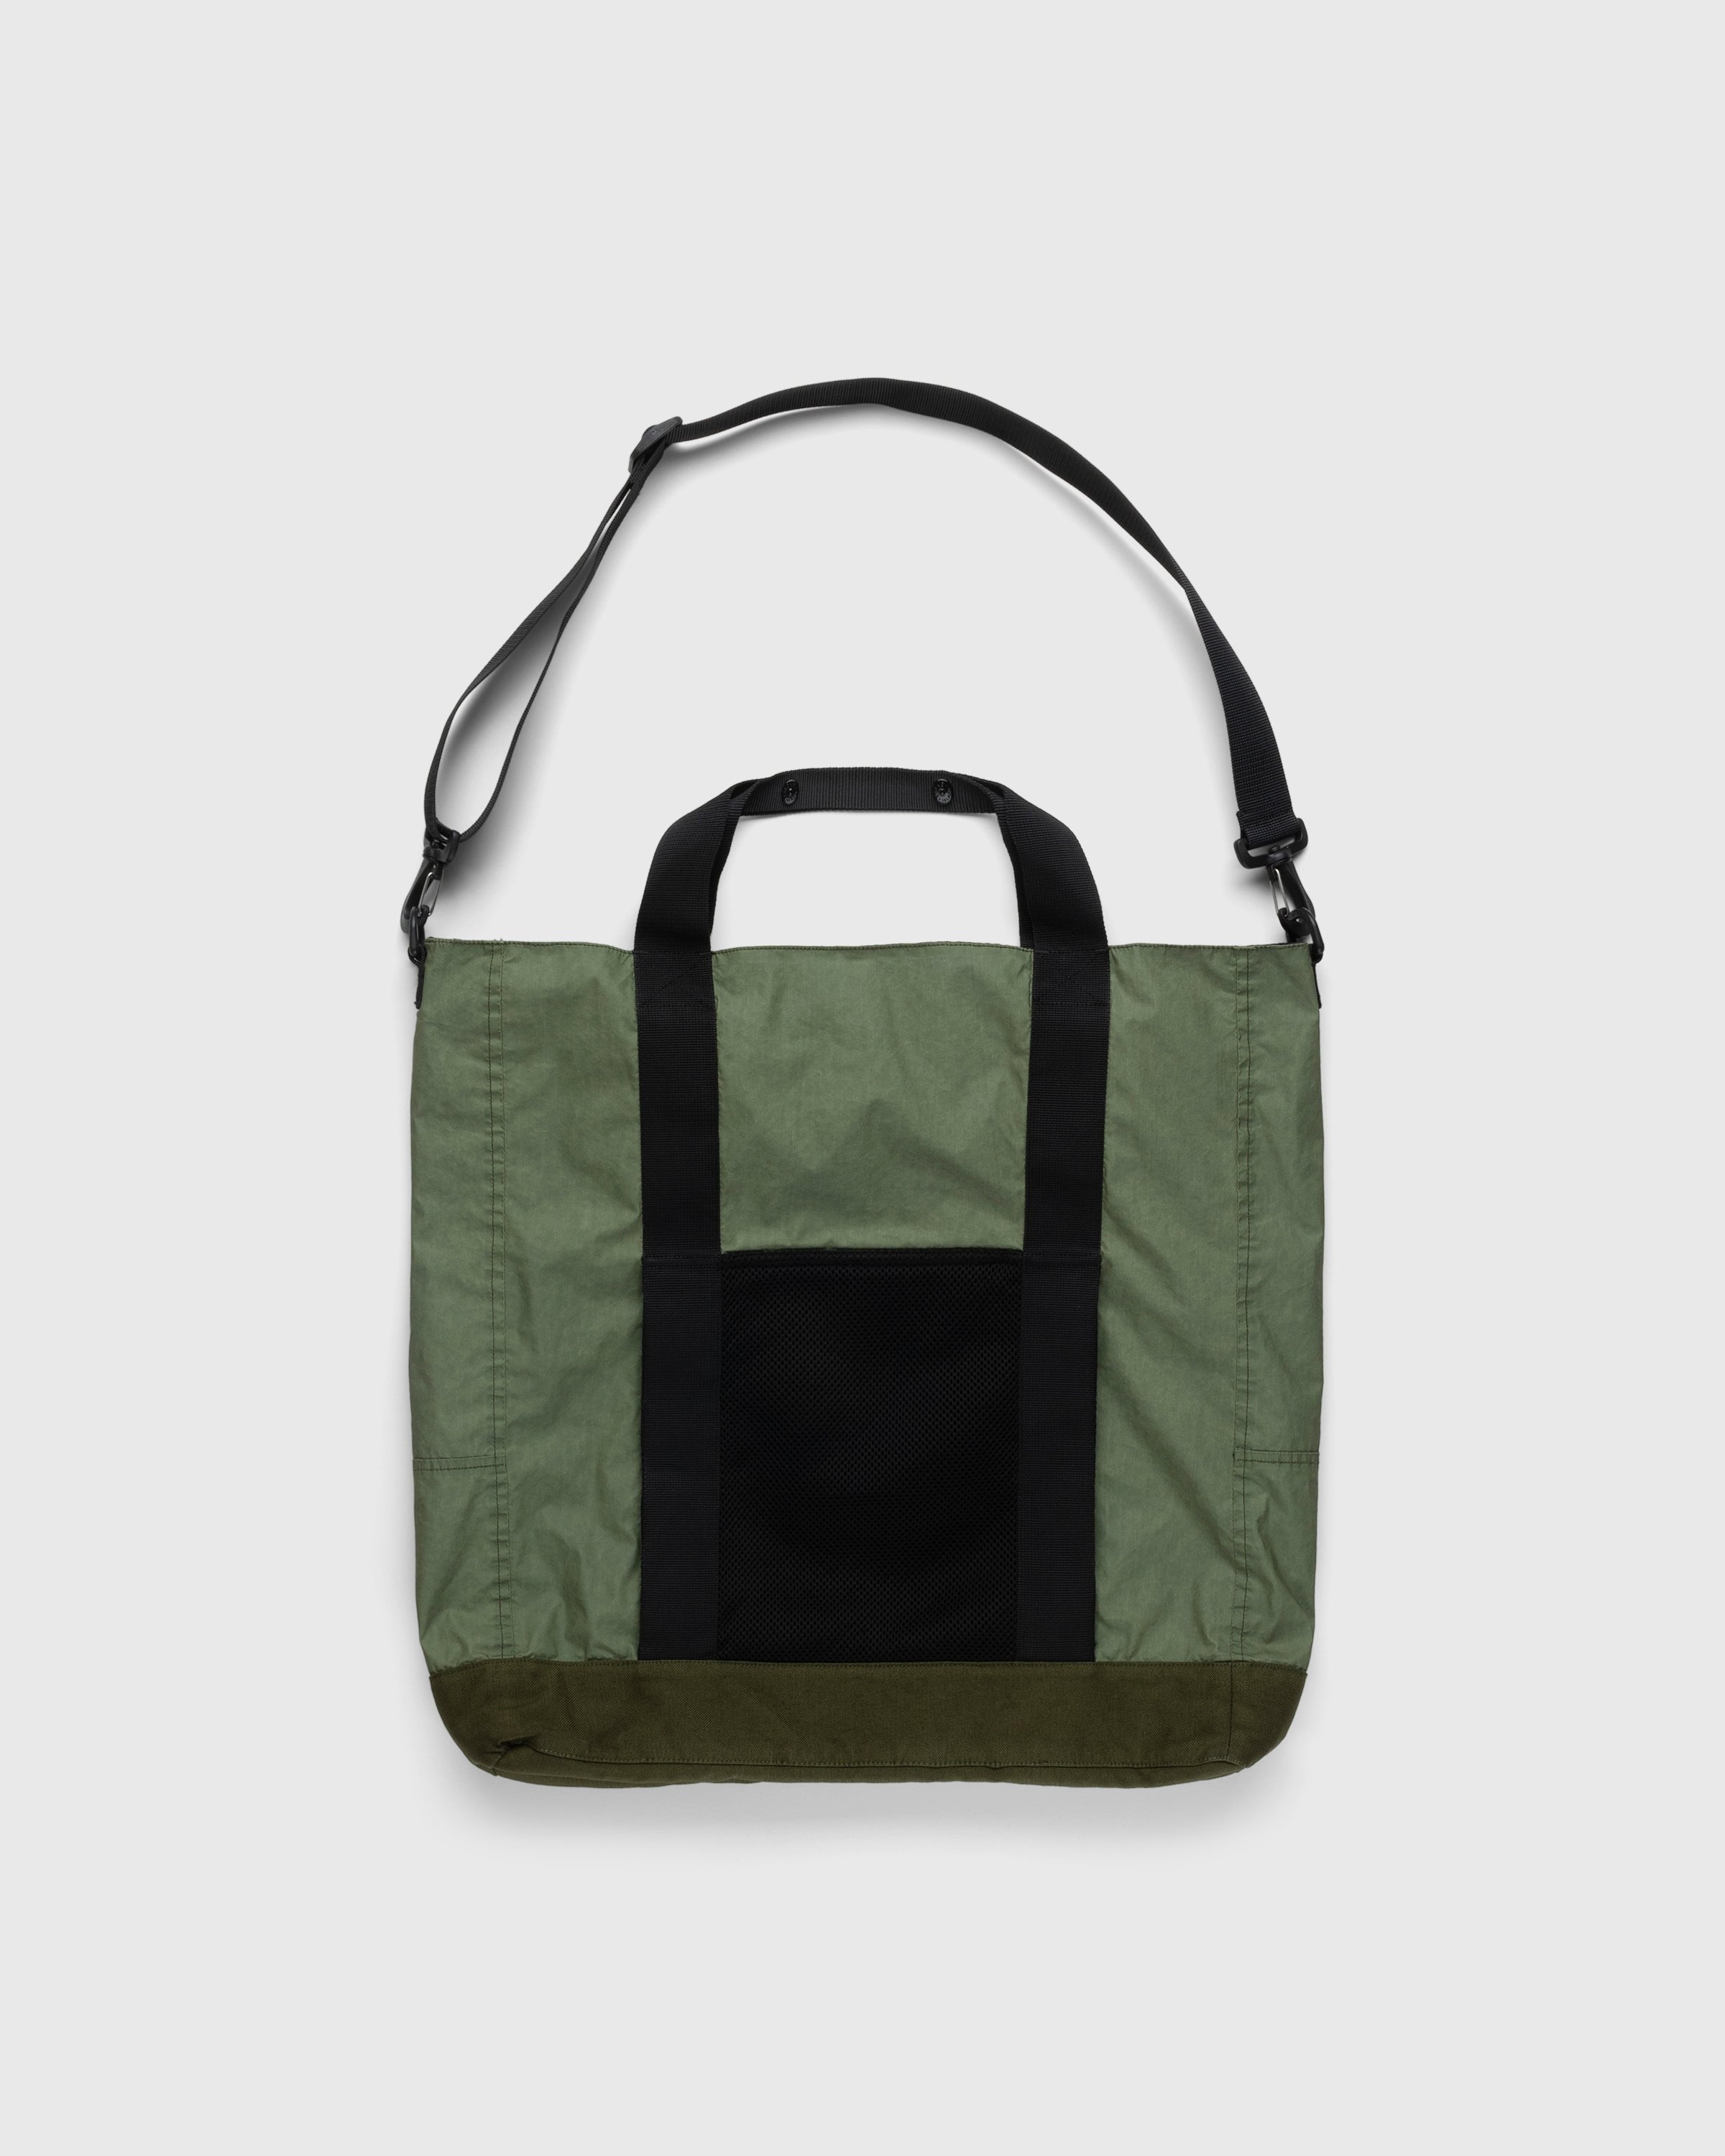 Stone Island – 91475 Garment-Dyed Tote Bag Olive - Bags - Green - Image 2